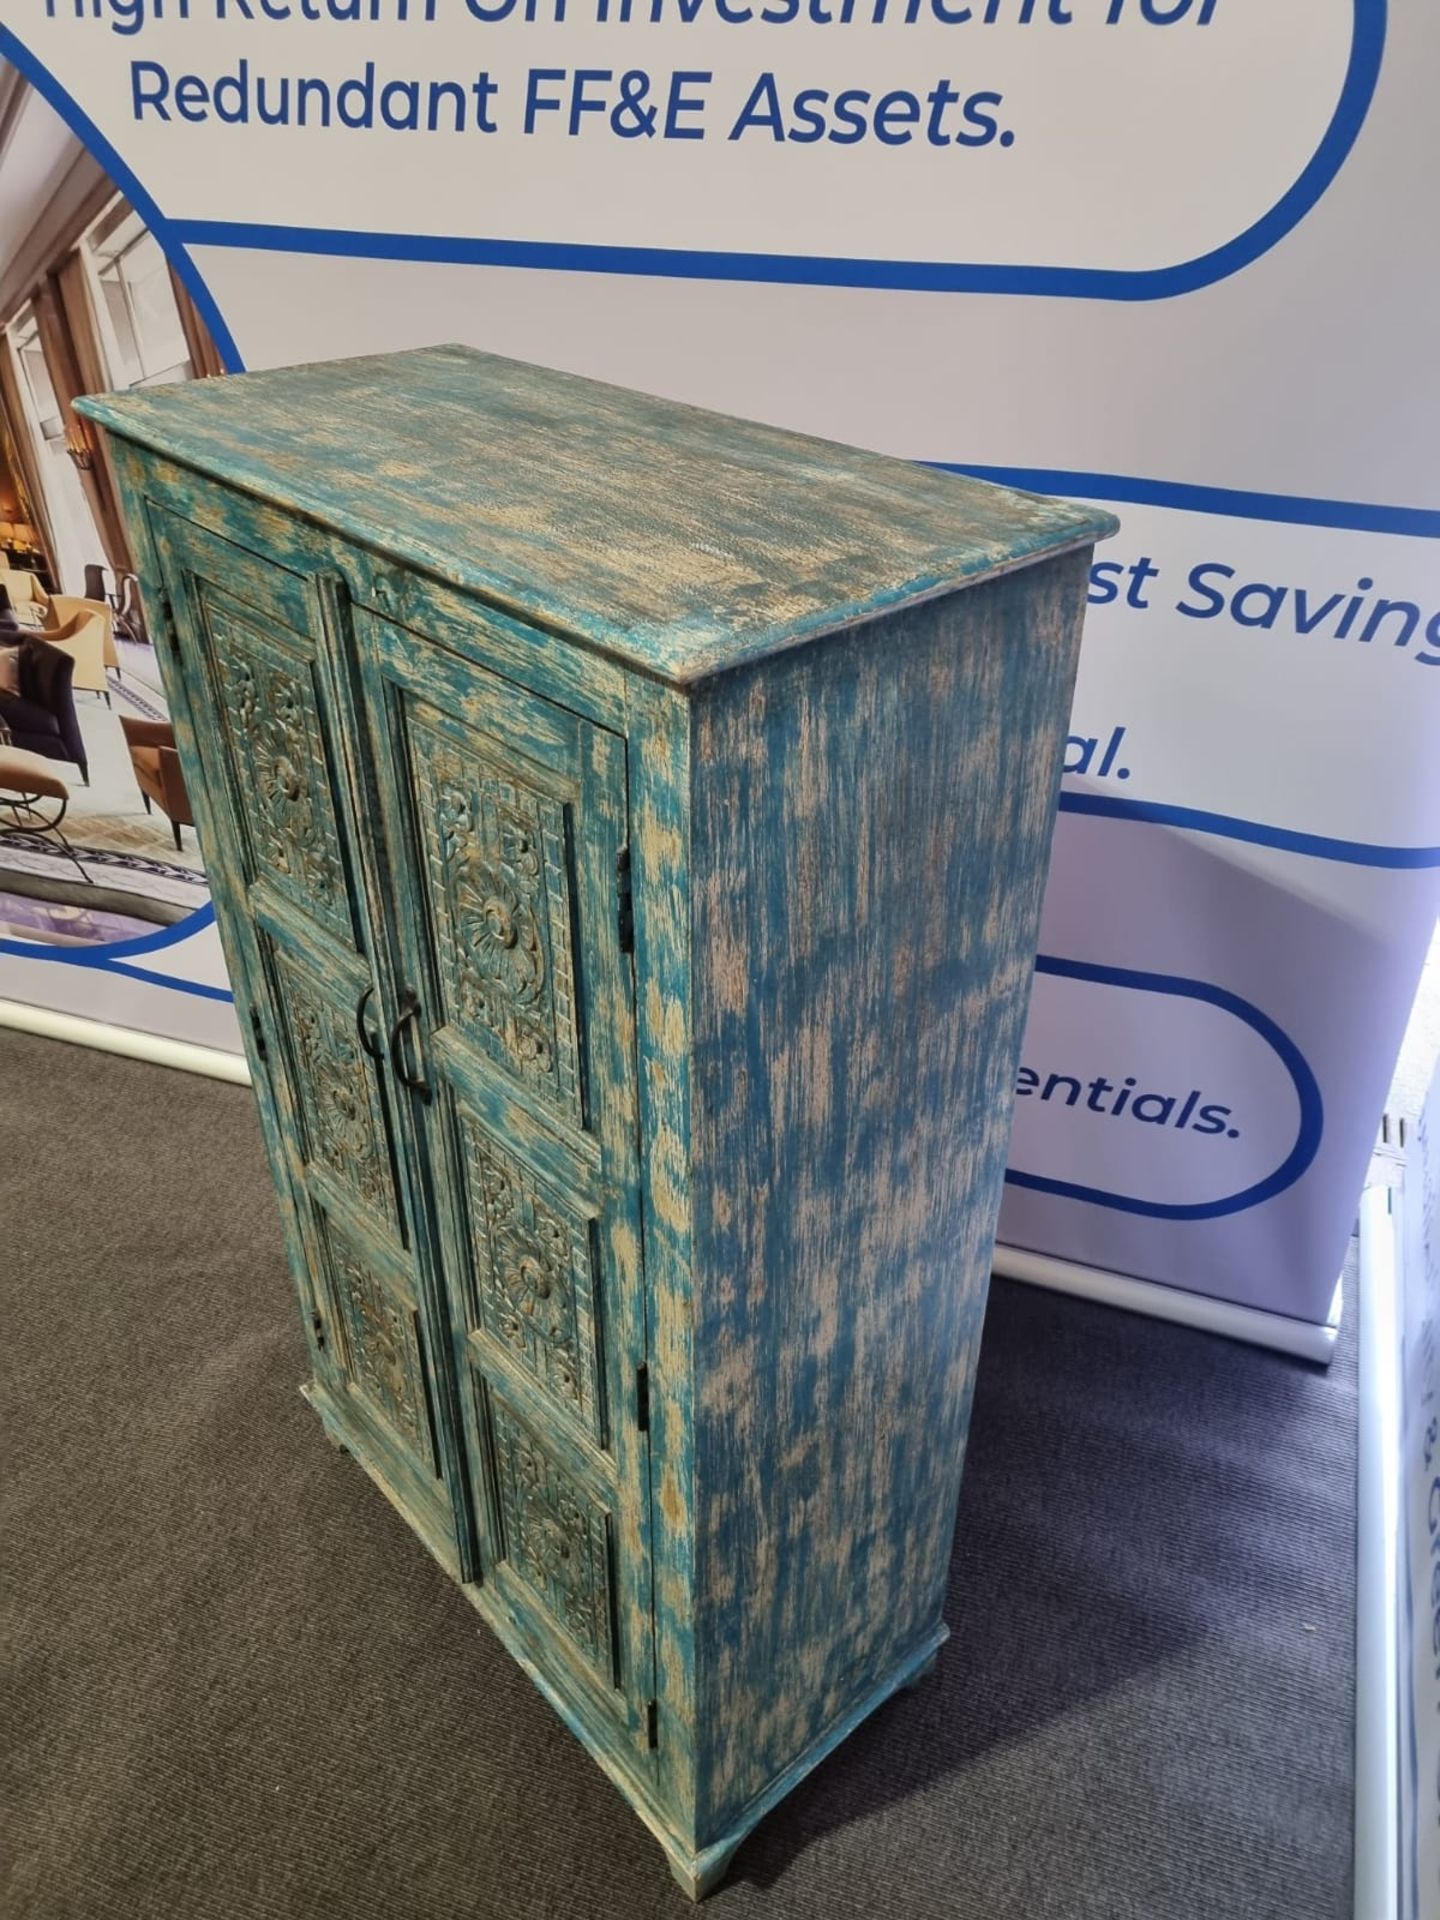 Handcrafted Two Door Distressed Painted Cabinet This Is A Beautiful Carved Cabinet That Has Been - Image 4 of 4